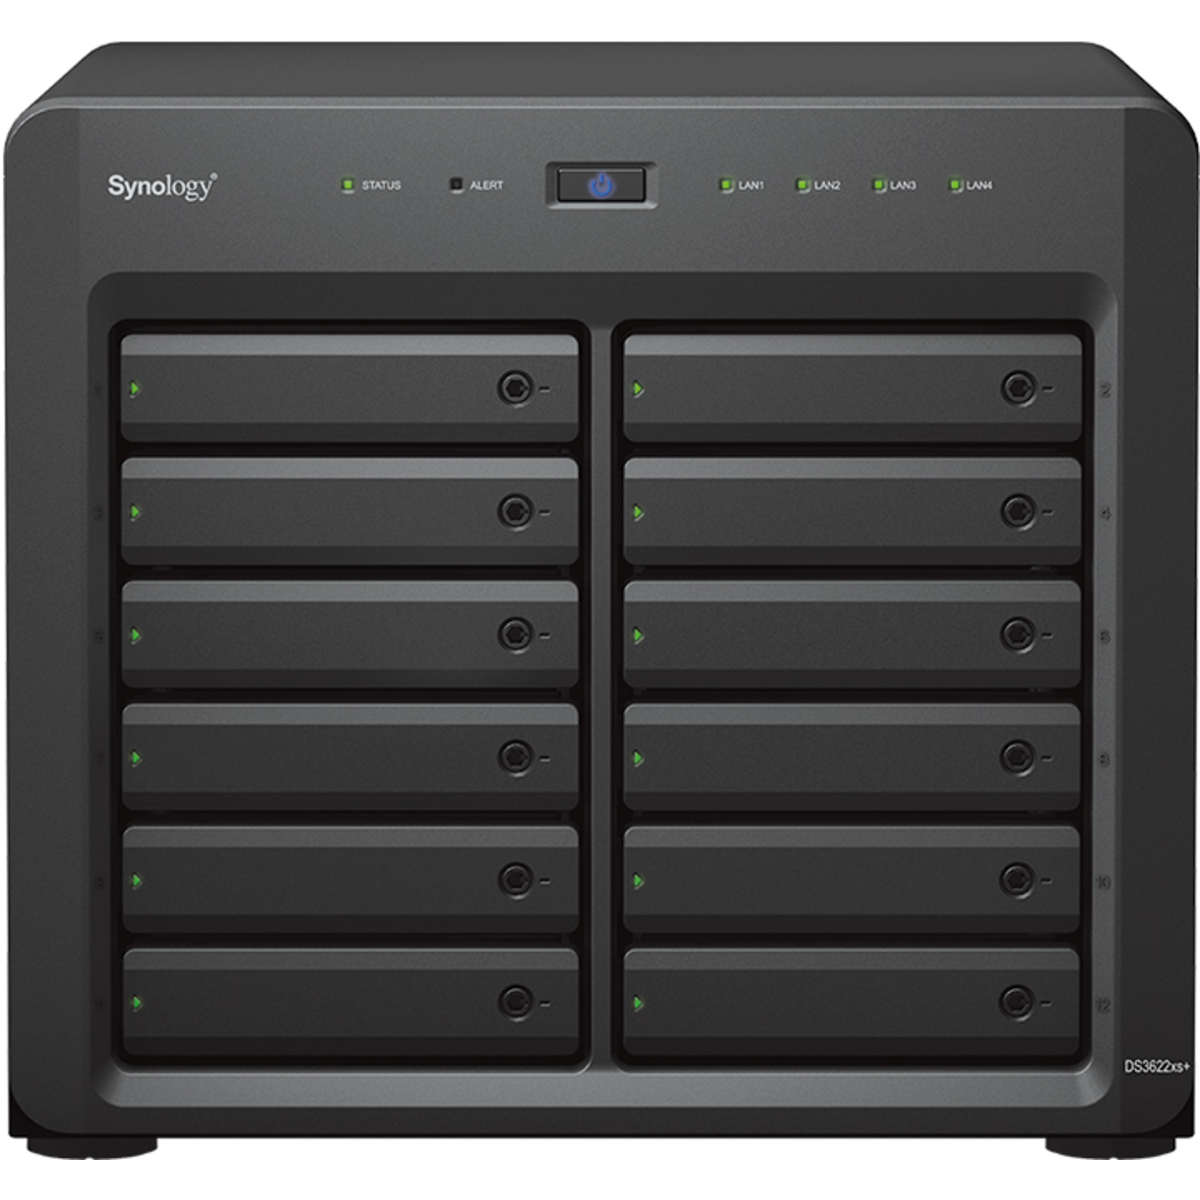 Synology DiskStation DS3622xs+ 108tb 12-Bay Desktop Multimedia / Power User / Business NAS - Network Attached Storage Device 9x12tb Seagate IronWolf ST12000VN0008 3.5 7200rpm SATA 6Gb/s HDD NAS Class Drives Installed - Burn-In Tested DiskStation DS3622xs+